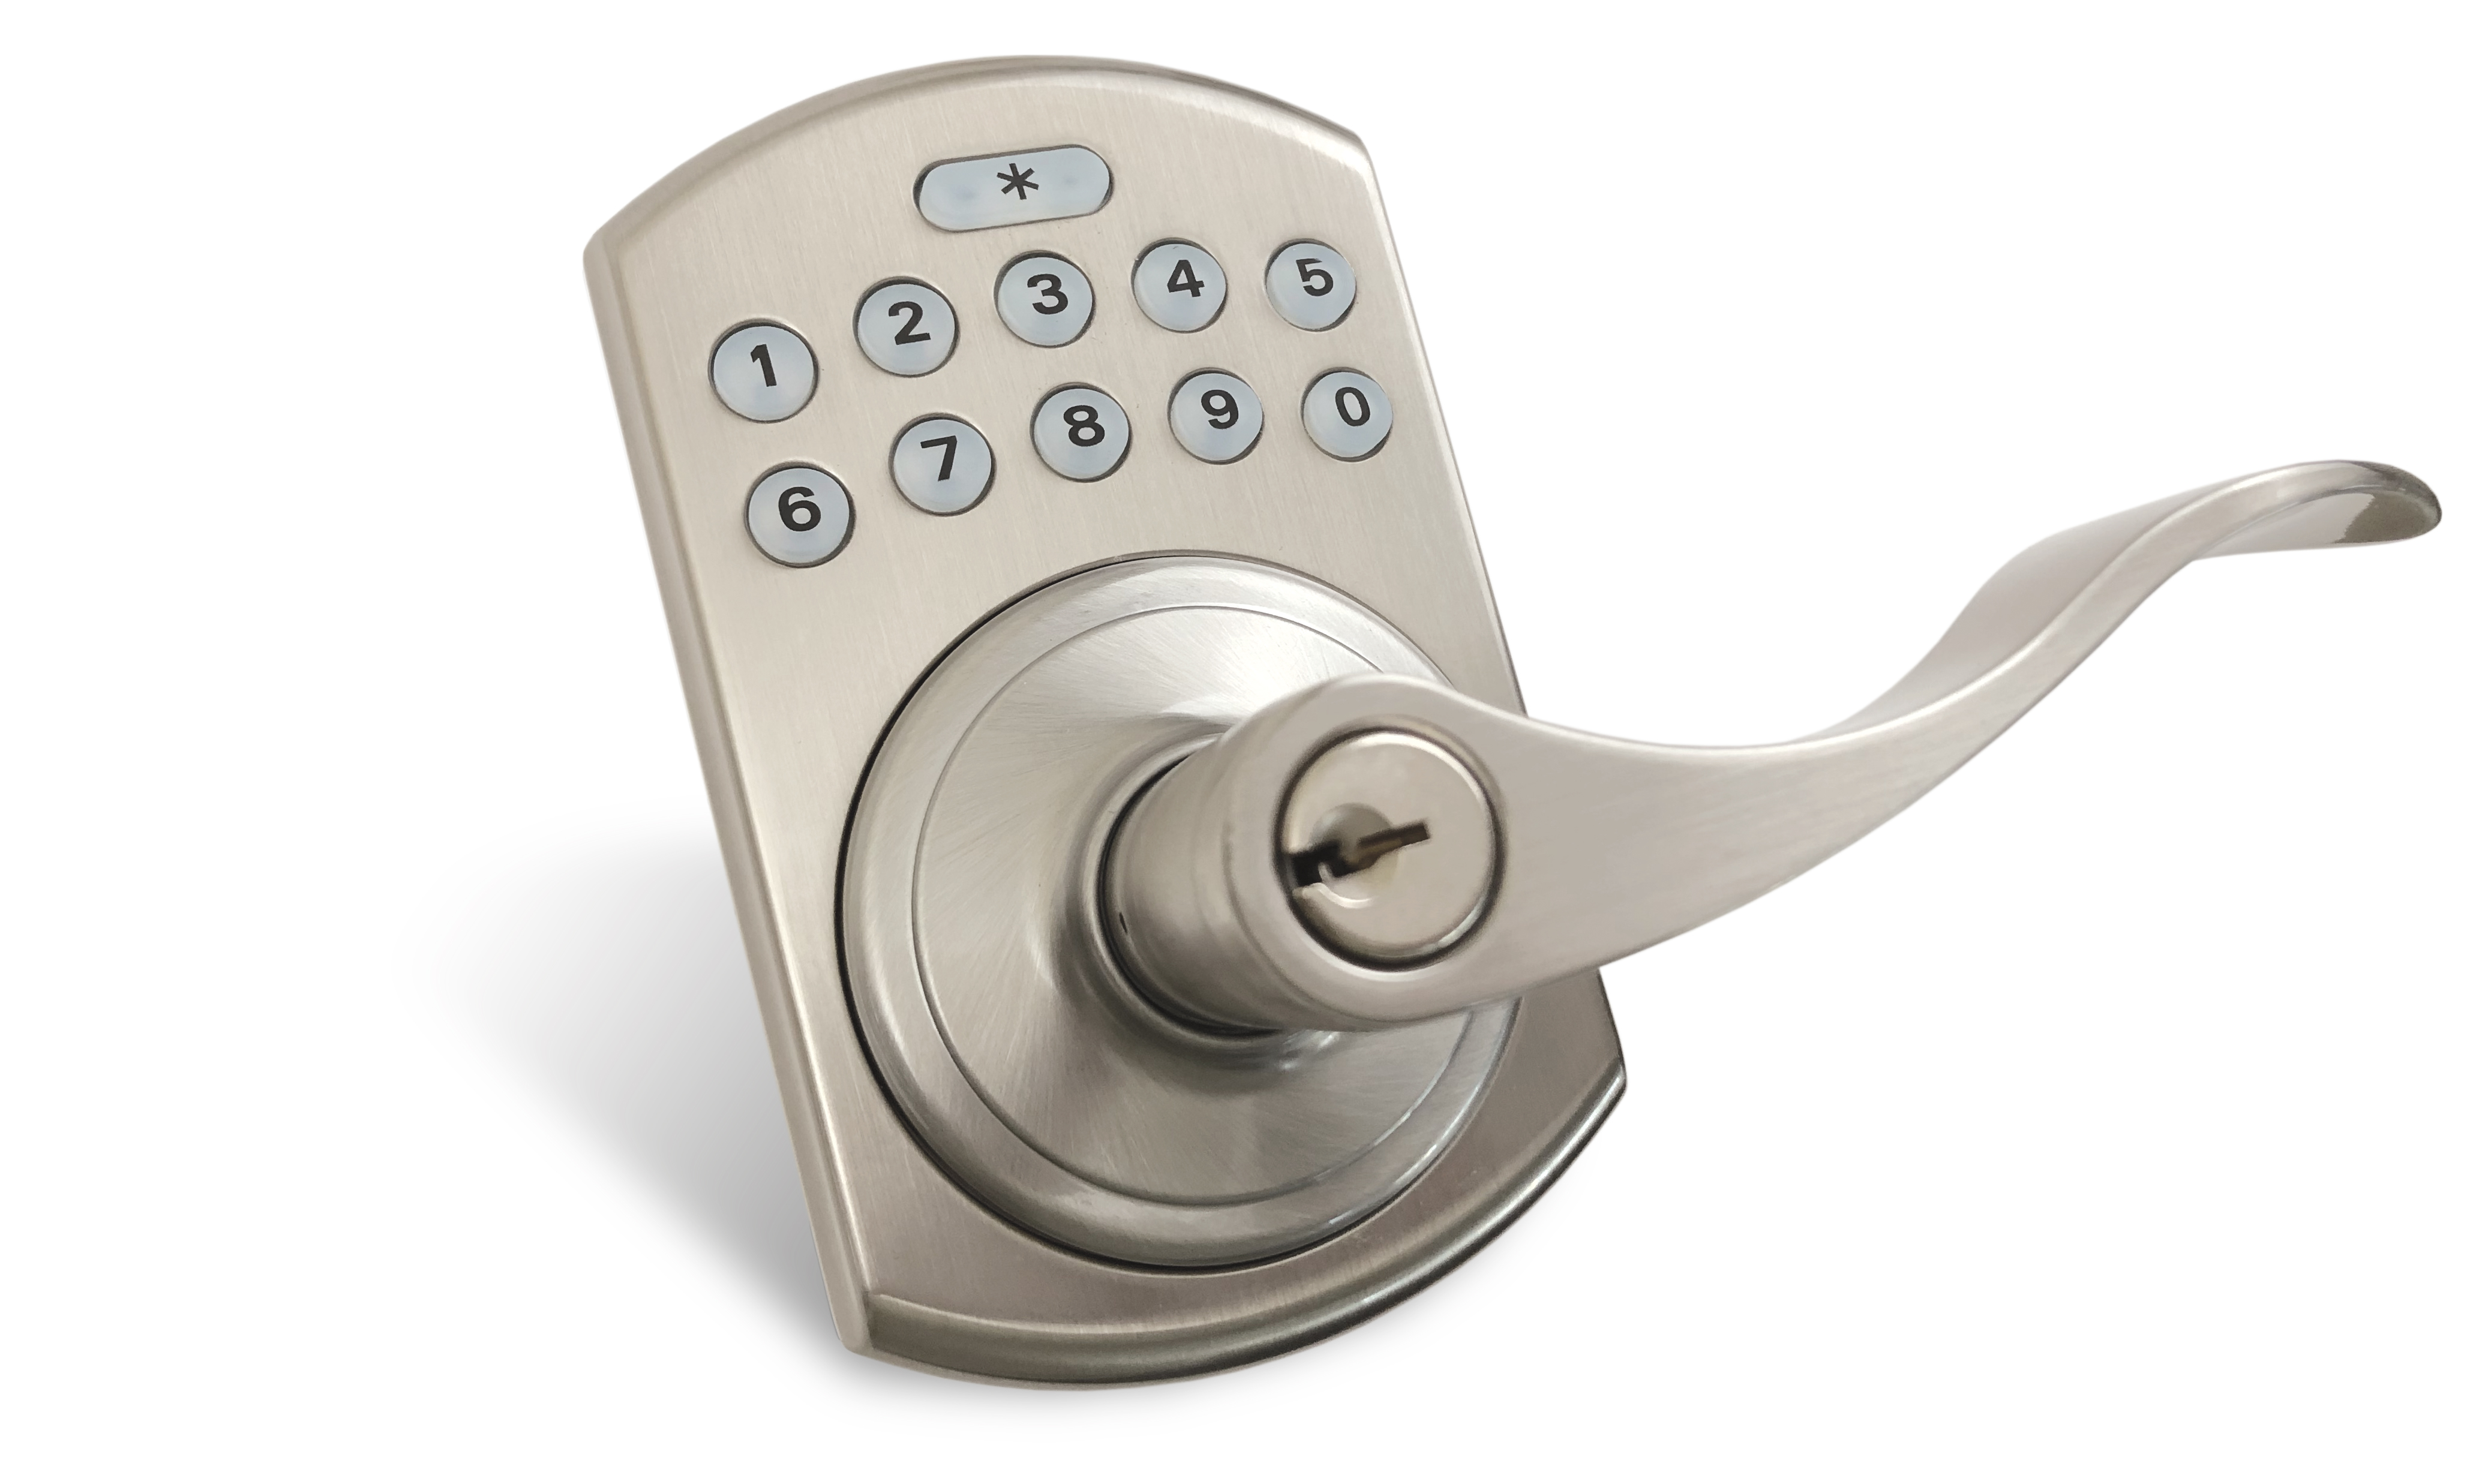 The LP250 Digital Lock with Logan Lever combines security, convenience and style.